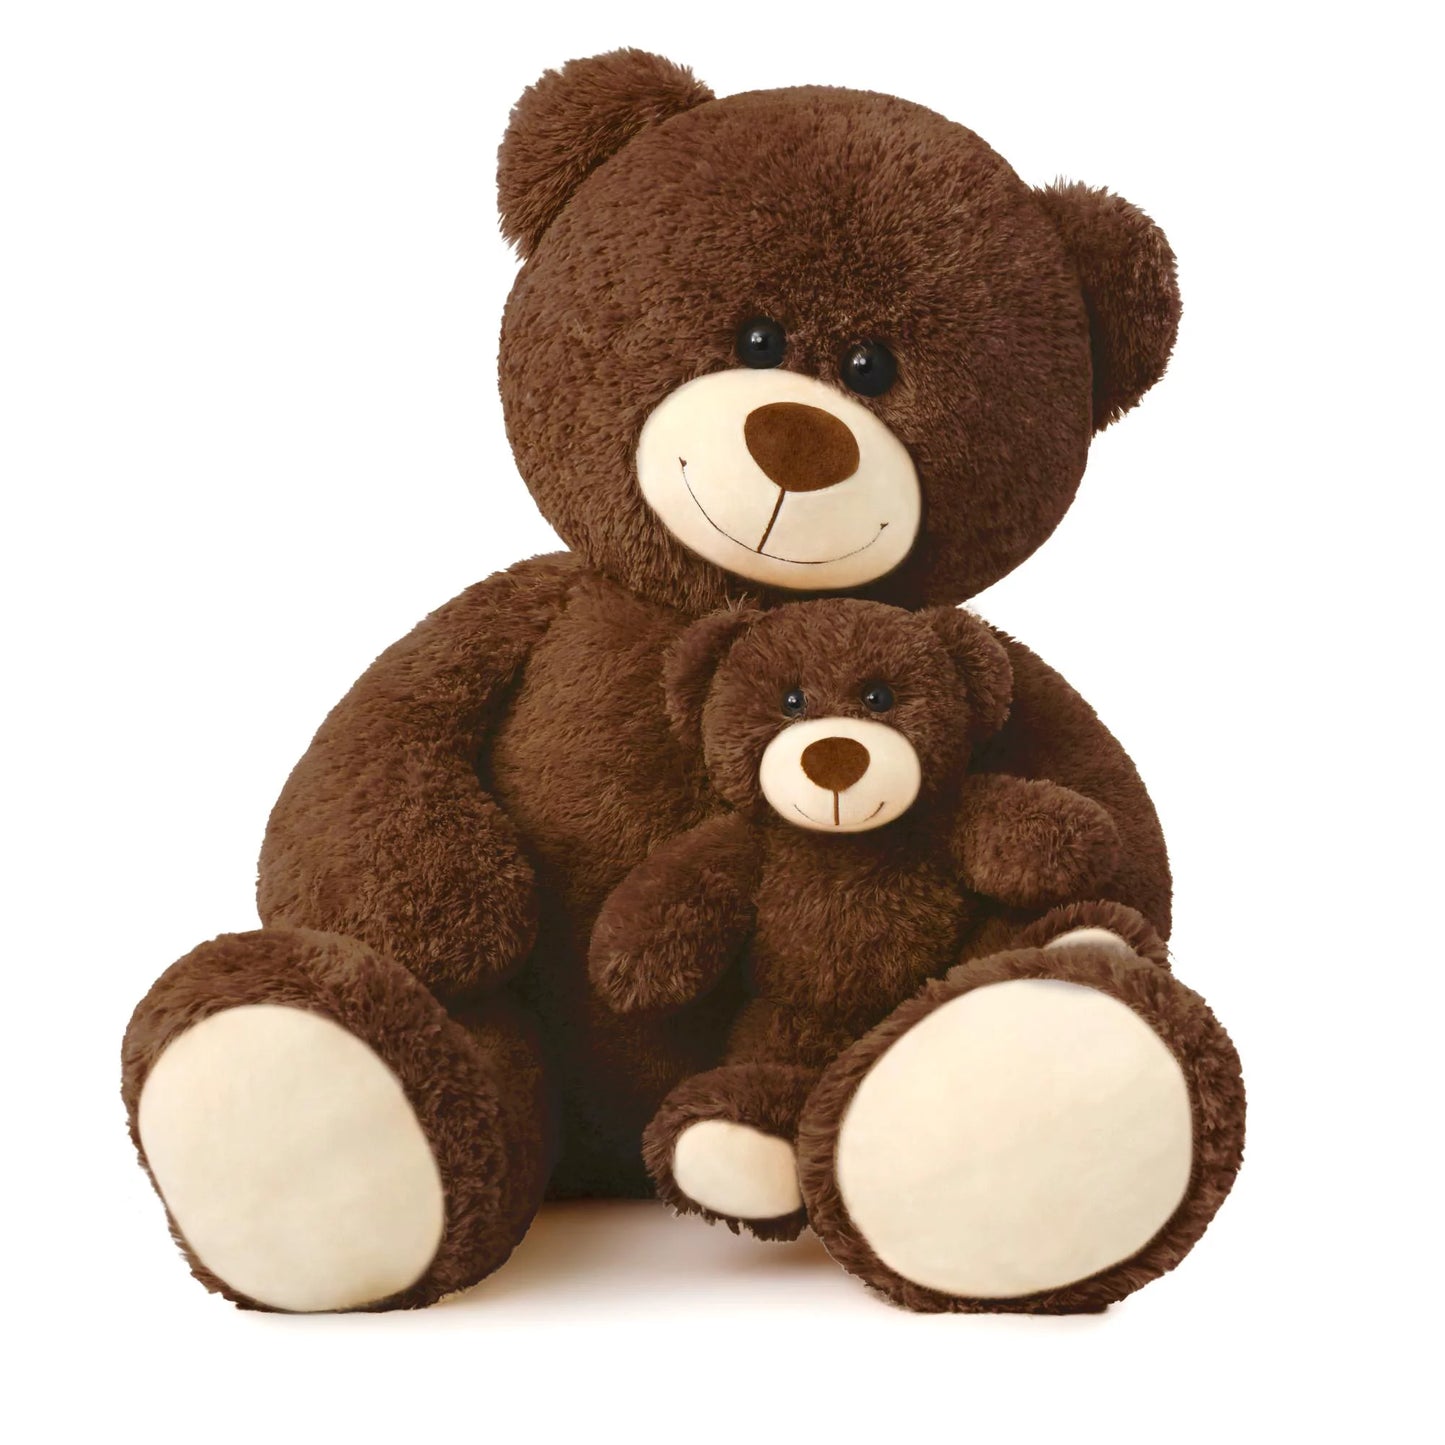 Giant Mommy Bear and Baby Stuffed Animal Toy, 39 Inches - MorisMos Stuffed Animal Toys